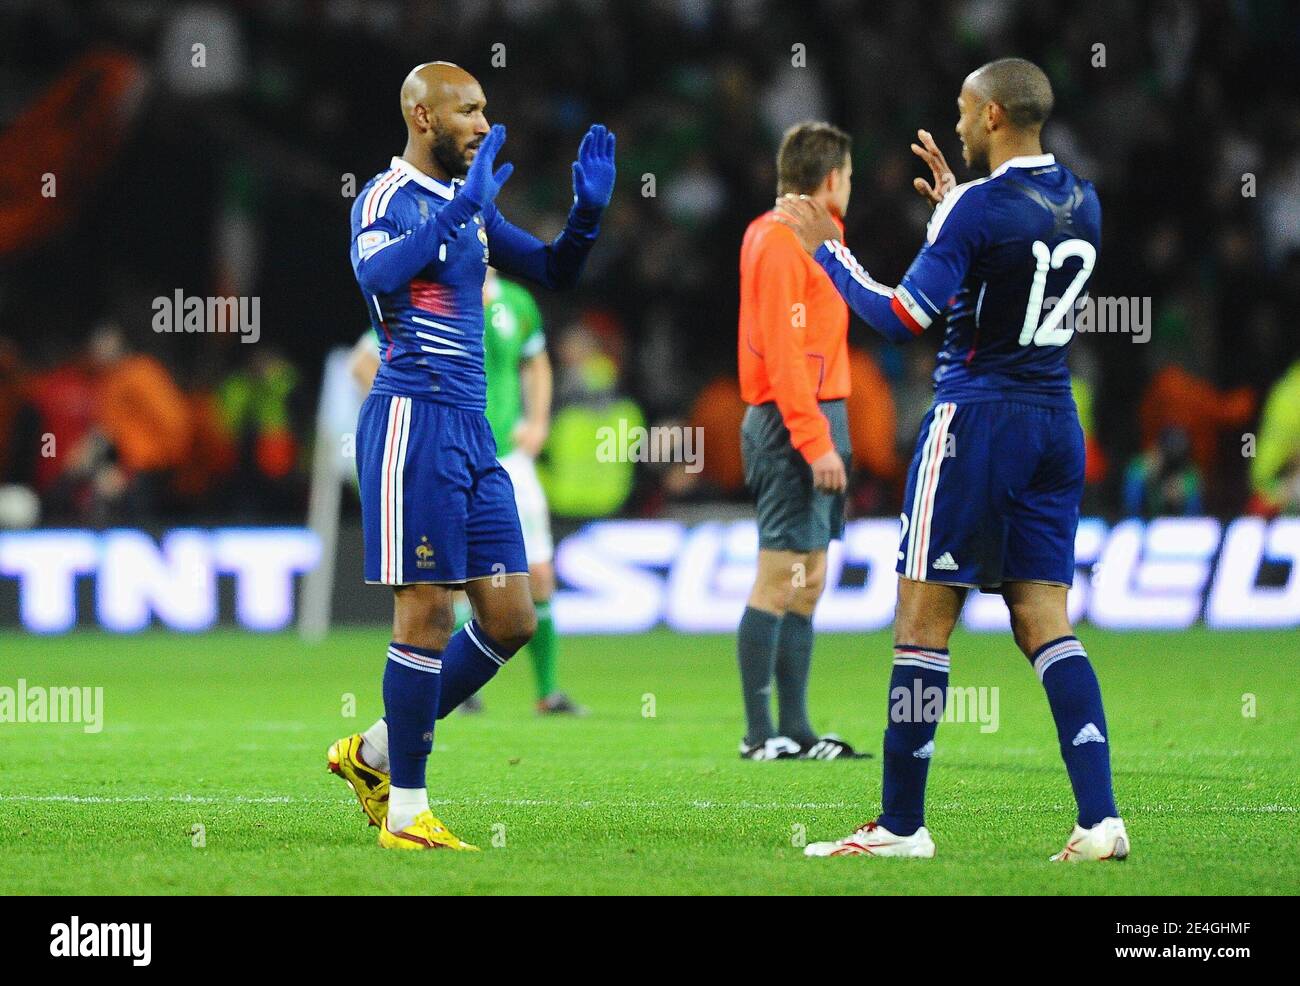 France's Nicolas Anelka and Thierry Henry during the World Cup 2010 Qualifying Play off soccer match, Ireland vs France at Croke Park stadium in Dublin, Ireland on November 14, 2009. France won 1-0. Photo by Steeve McMay/ABACAPRESS.COM Stock Photo